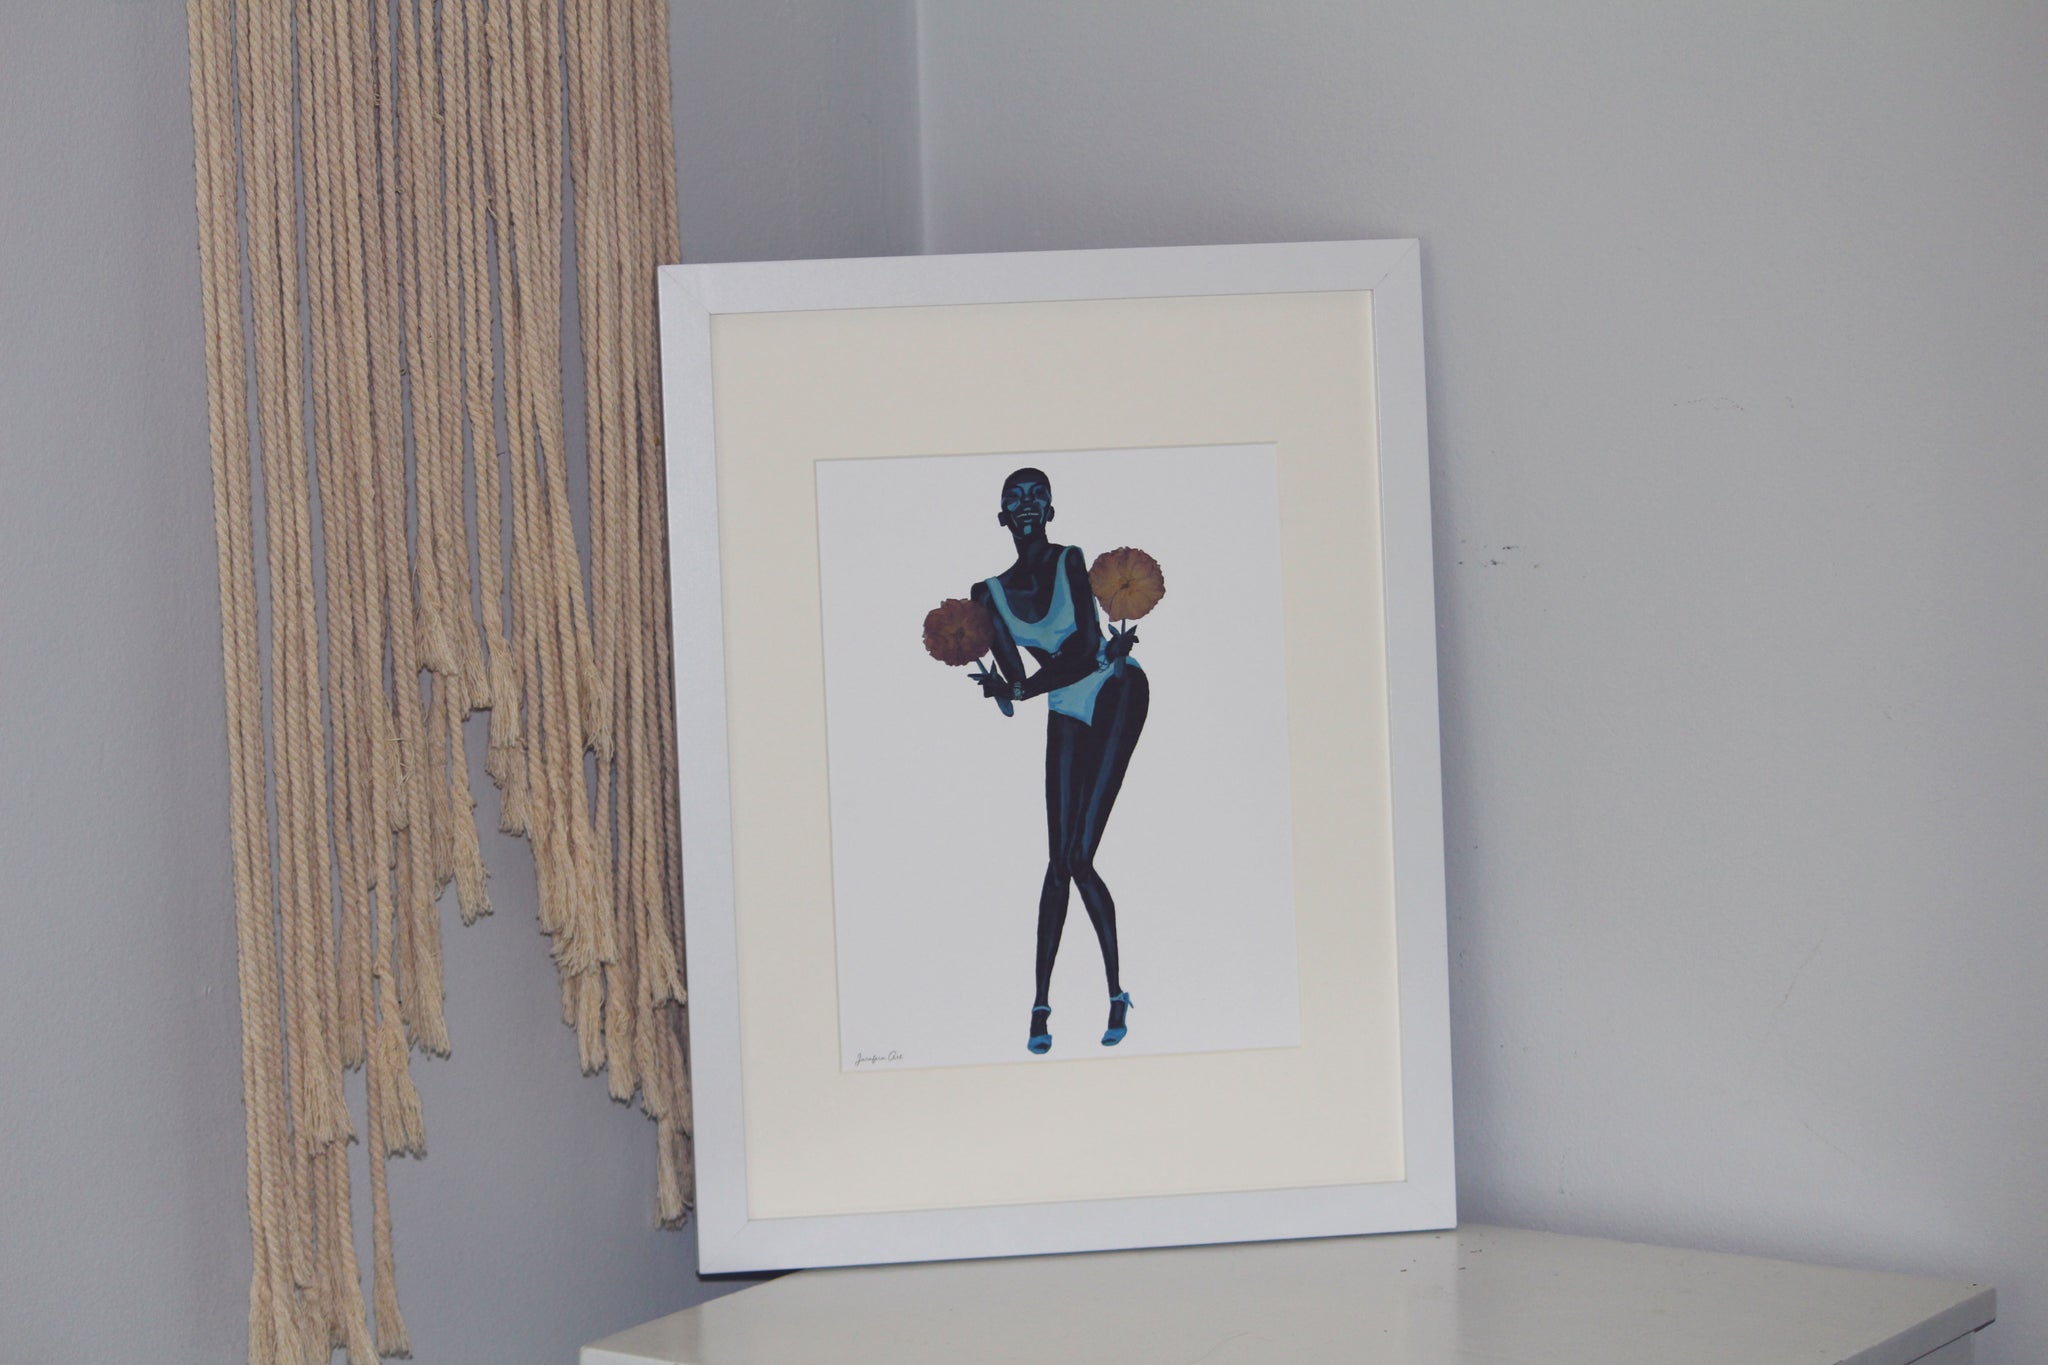 8.5 by 11 inch Black fashion art print of a painting of Adut Akech wearing a Chanel swimsuit and holding pressed flowers with a white background in a white frame with matting standing up on a white table